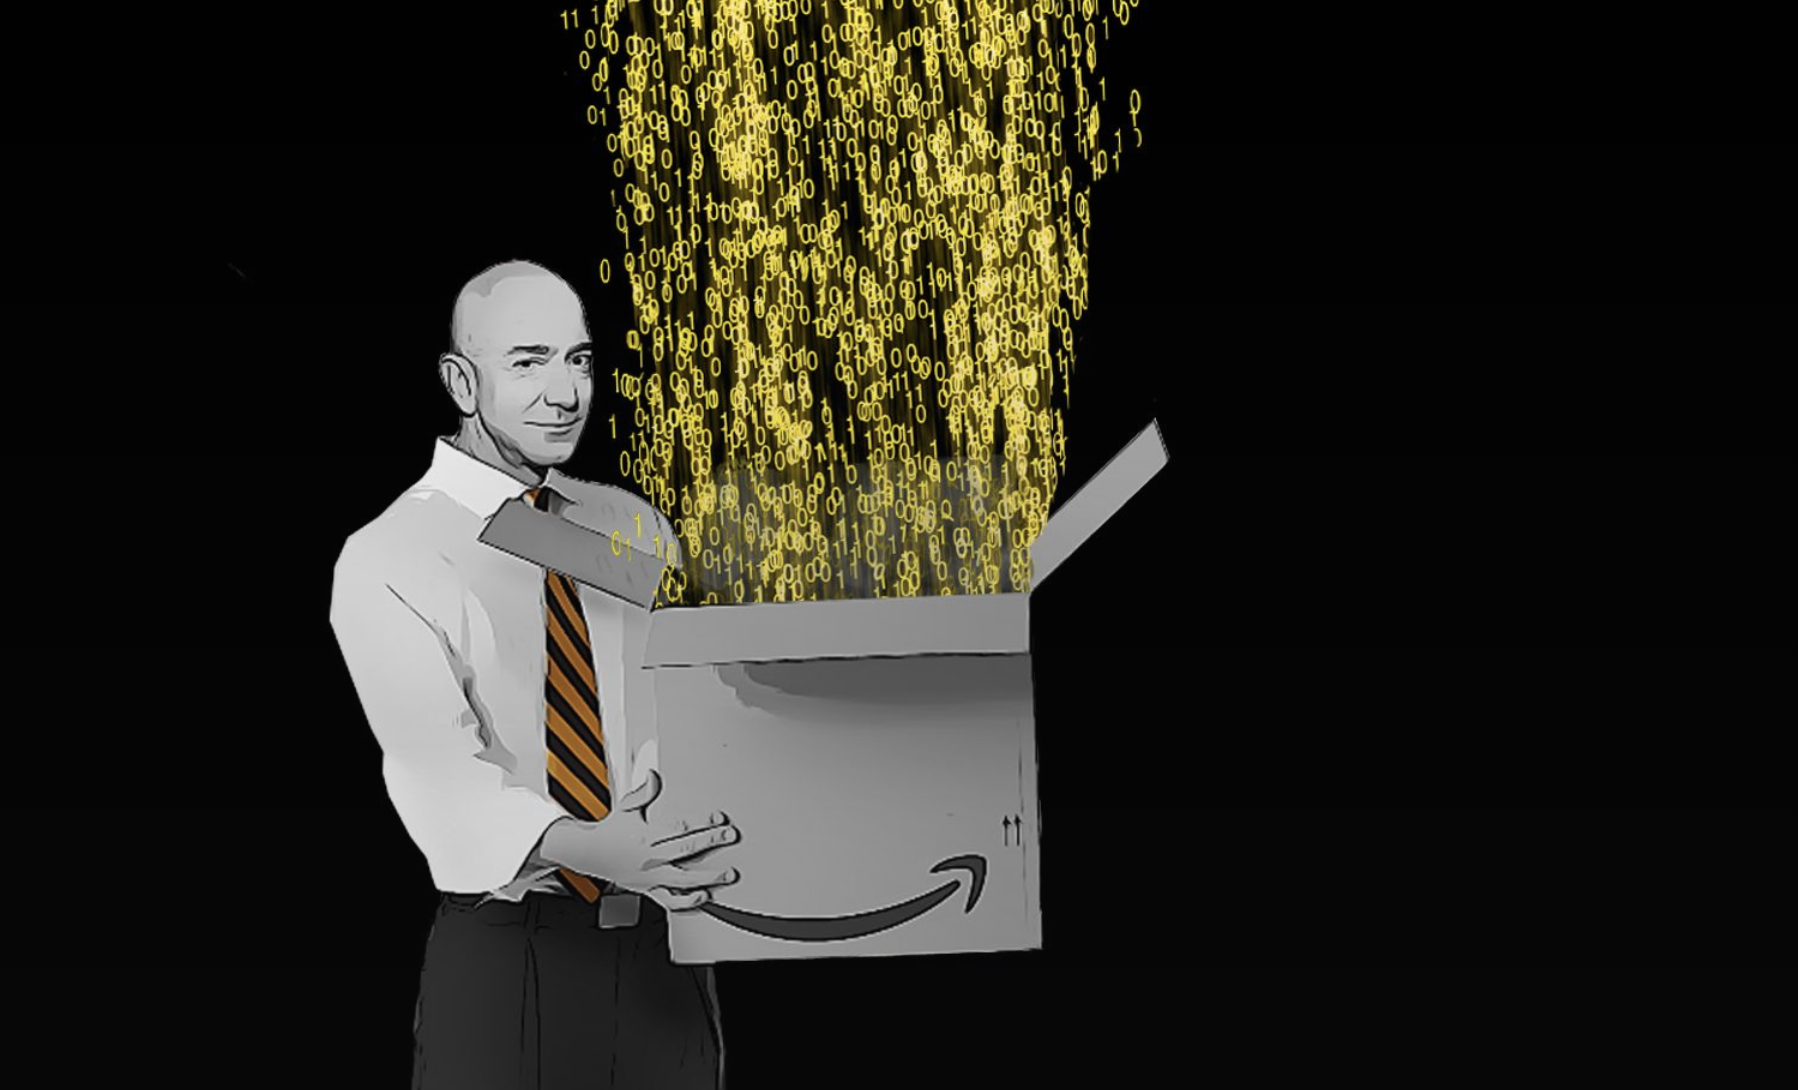 Why Amazon knows so much about you